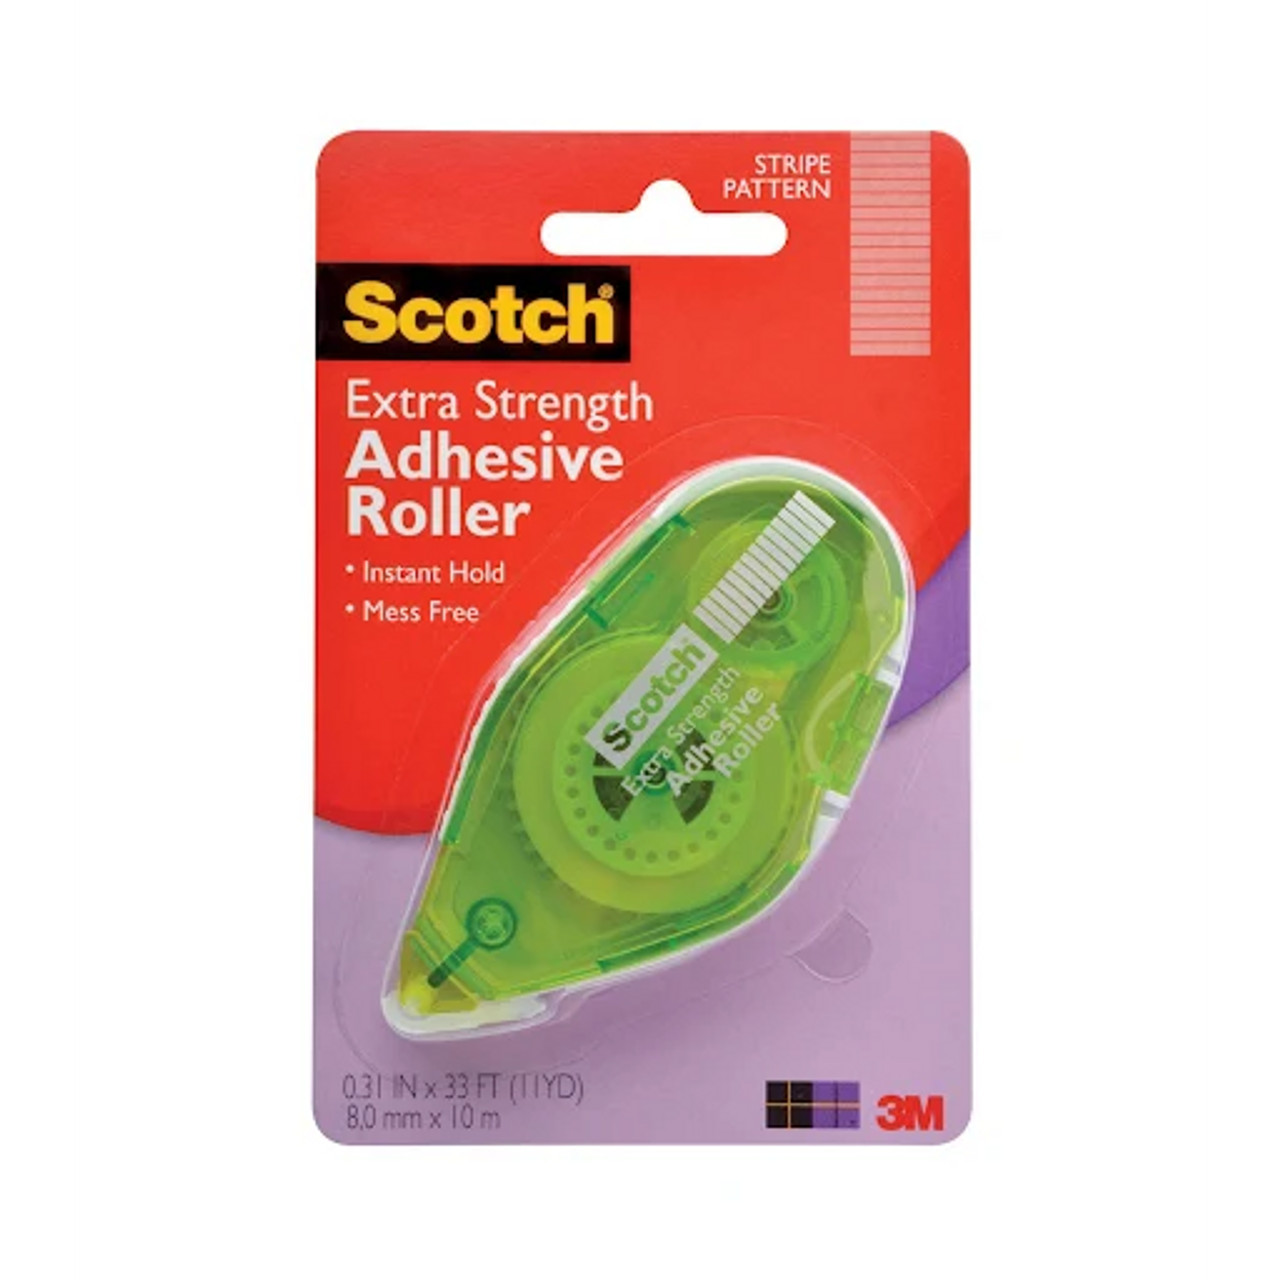 Scotch Double-Sided Permanent Tape Runner Value Pack .31 x 16.3